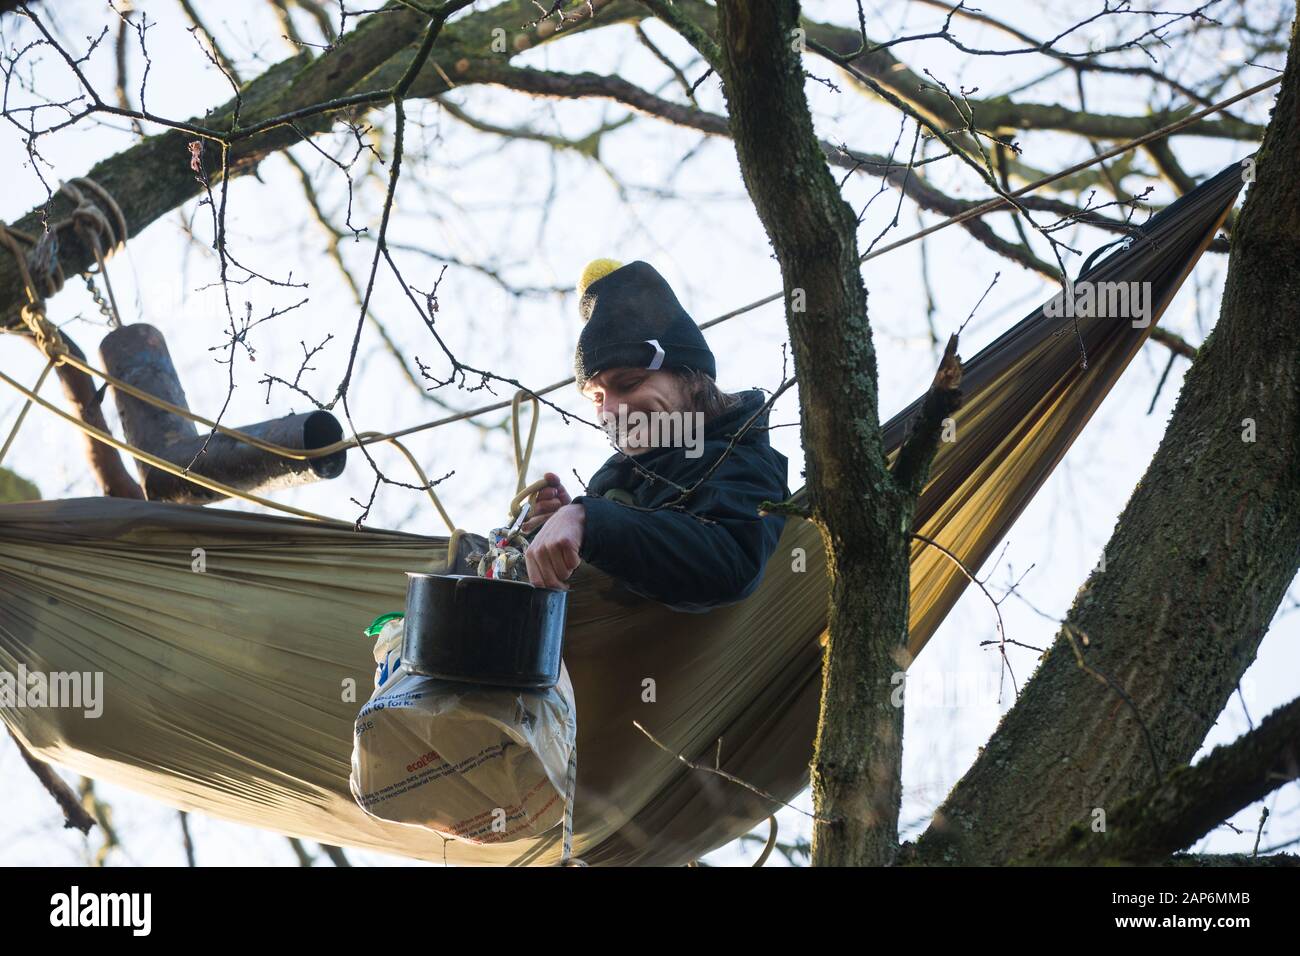 Harefield, UK. 21 January, 2020. An activist lying in a hammock suspended high up in a tree at the Save the Colne Valley wildlife protection camp enjoys a pot of breakfast porridge. Activists seeking to protect ancient woodland threatened by the HS2 high-speed rail link continue to occupy both the roadside and woodland sites of the camp having retaken it from bailiffs acting on behalf of HS2 on 18th January. 108 ancient woodlands are set to be destroyed by HS2. Credit: Mark Kerrison/Alamy Live News Stock Photo